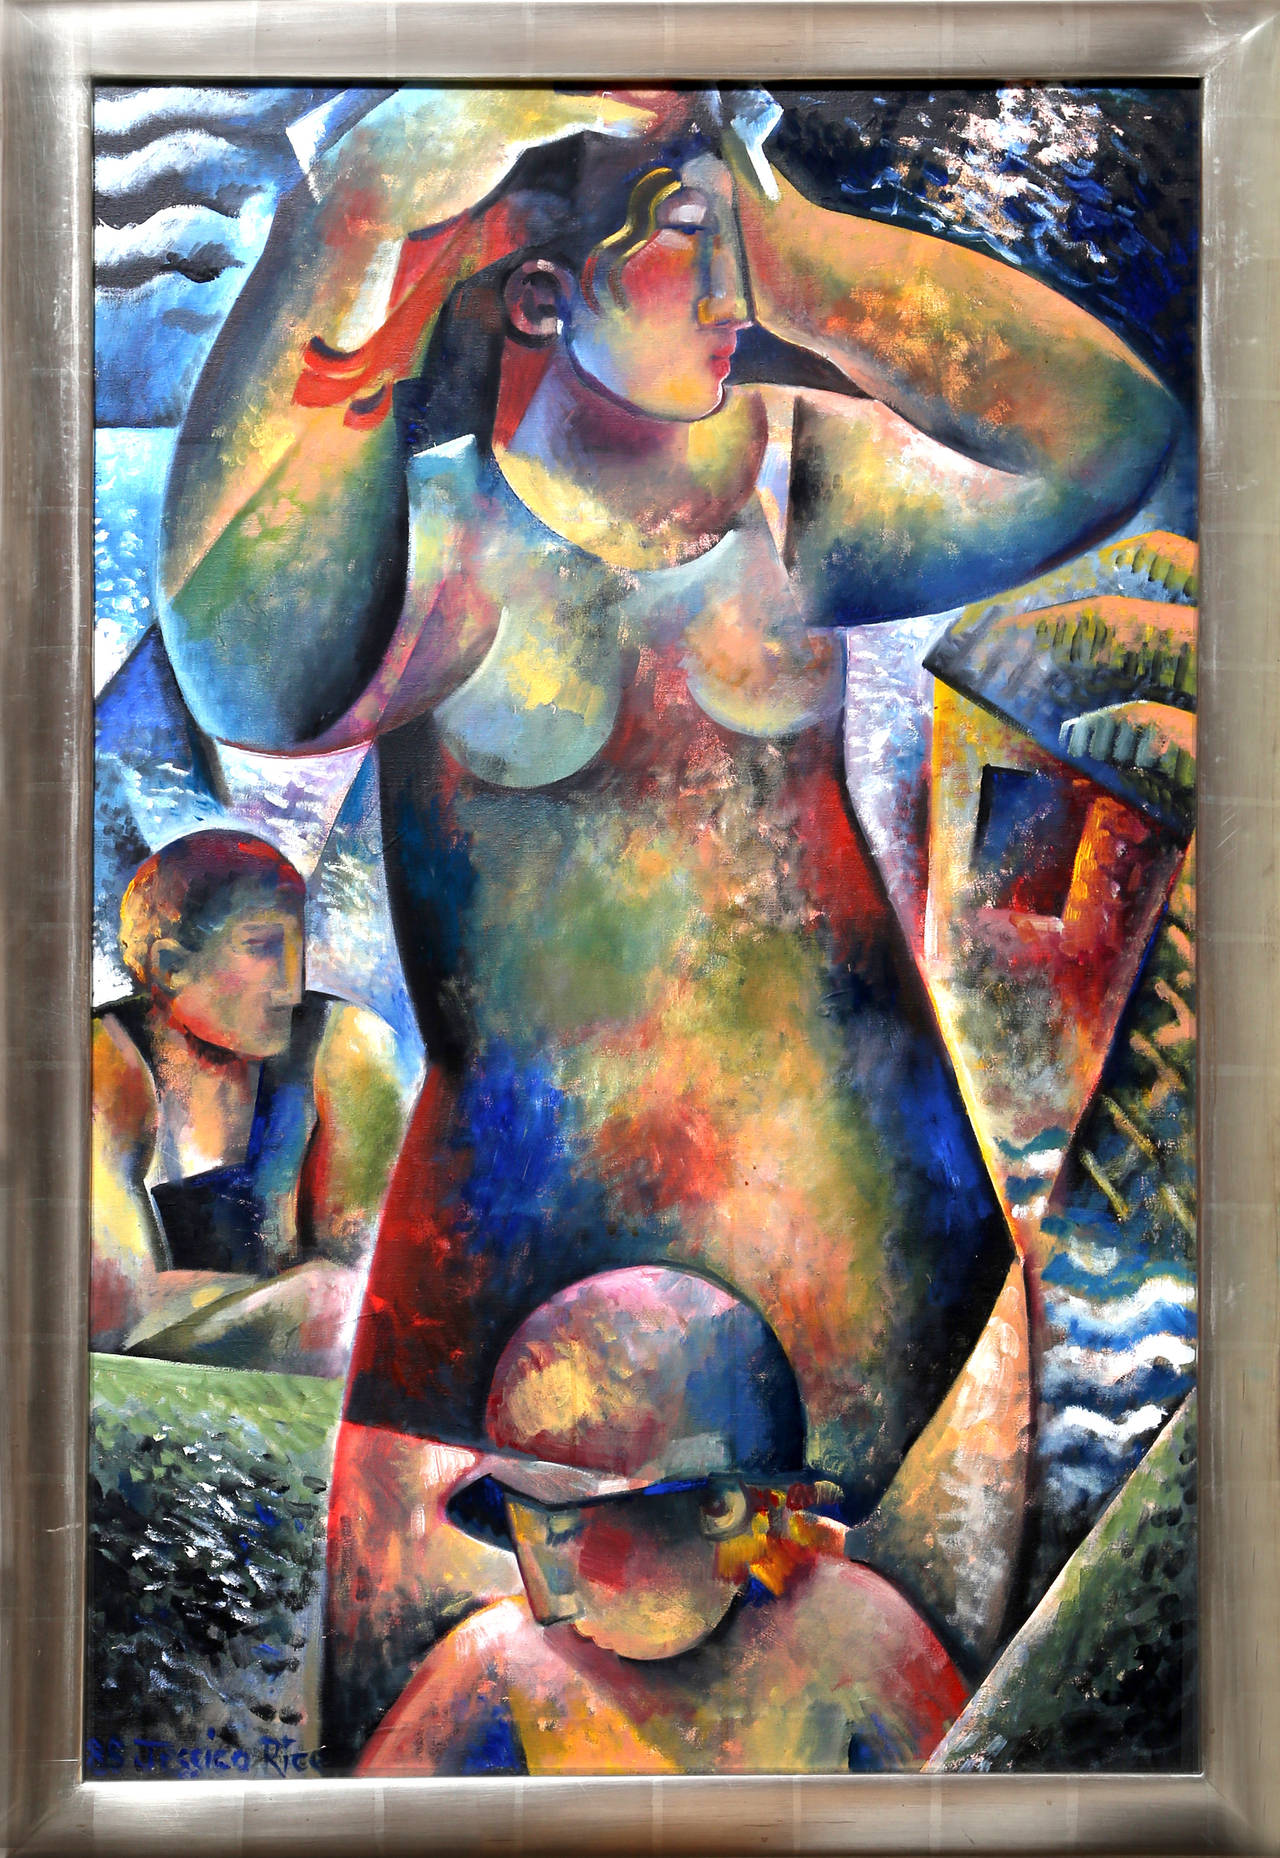 An oil painting by Jessica Rice from 1985. A cubist scene of figures on a tropical beach. Framed in silver wood frame. 
  
Artist: Jessica Rice
Title: Bathers
Year: 1985
Medium: Oil on Canvas, signed and dated l.l.
Size: 40 in. x 26 in. (101.6 cm x